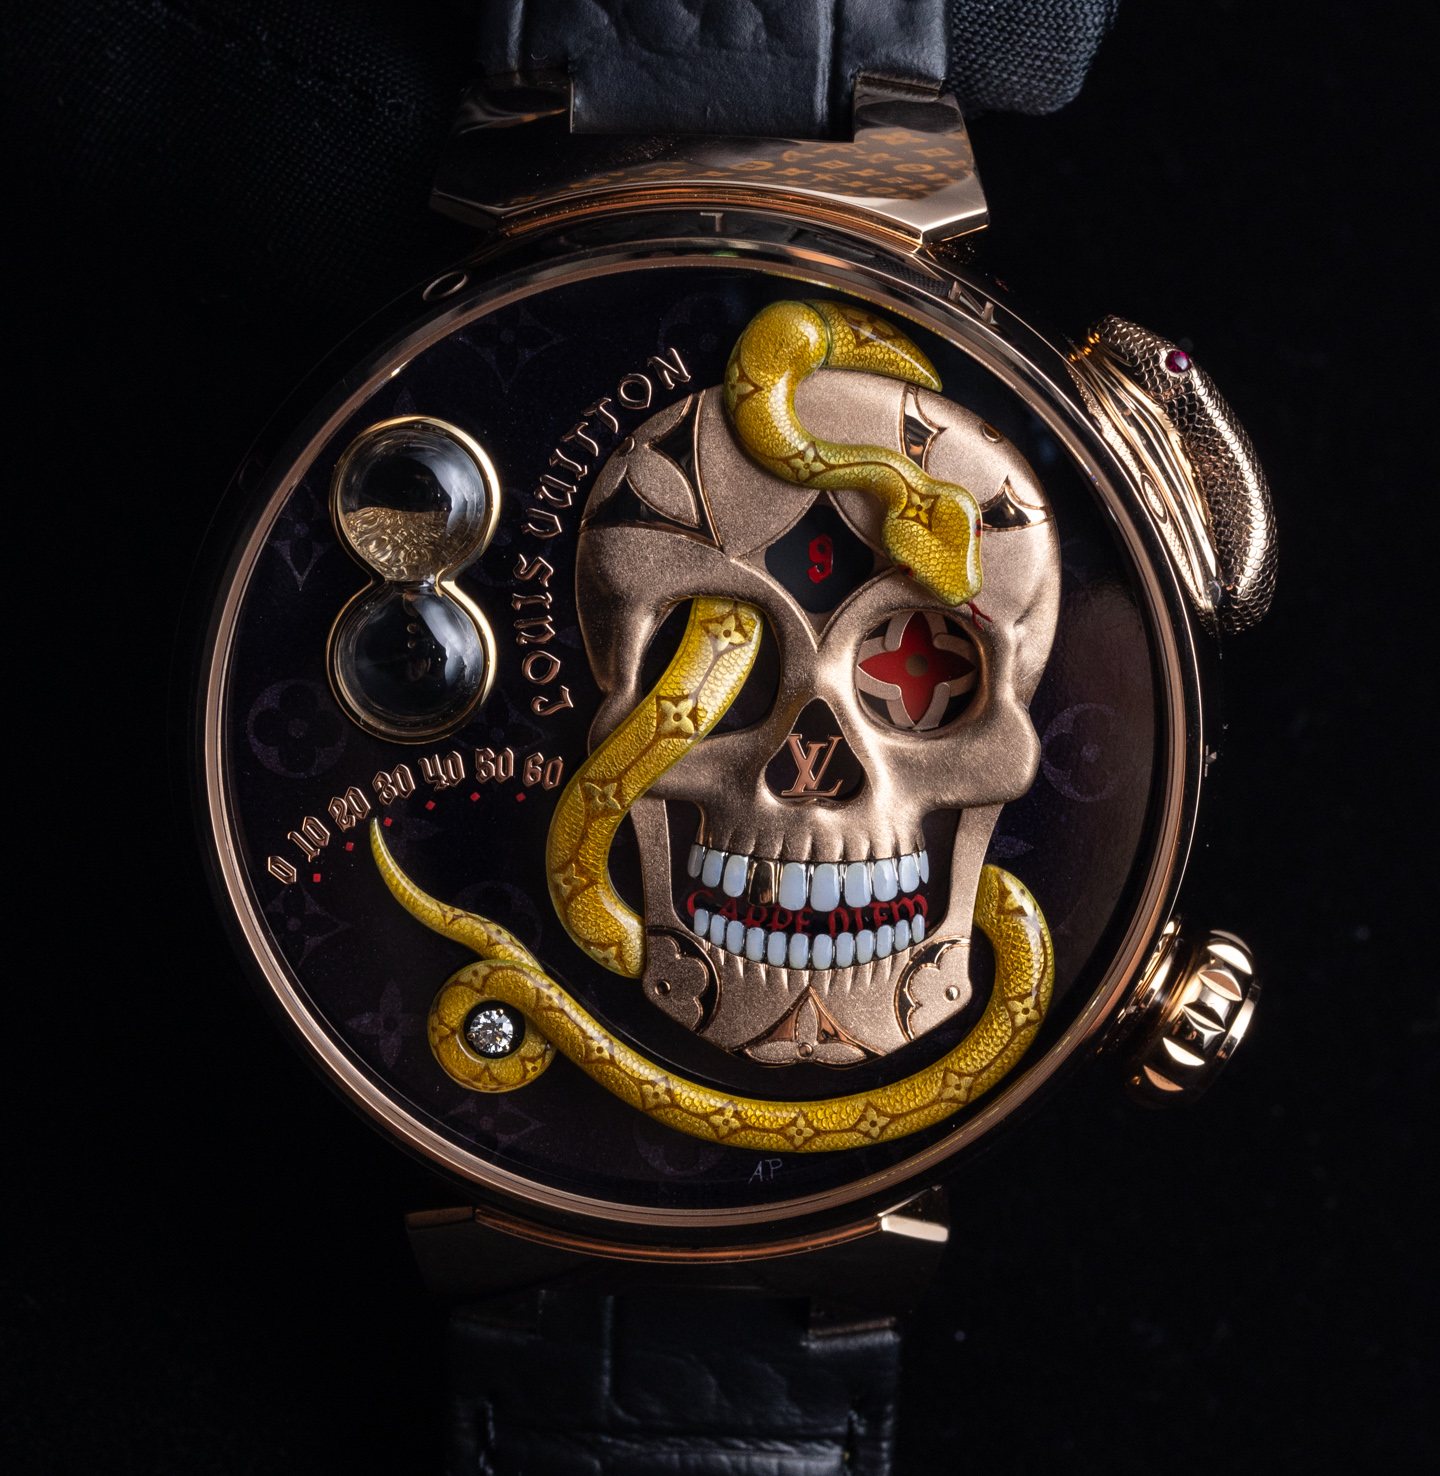 A Feast for the Eyes: Louis Vuitton Tambour Fiery Heart Automata